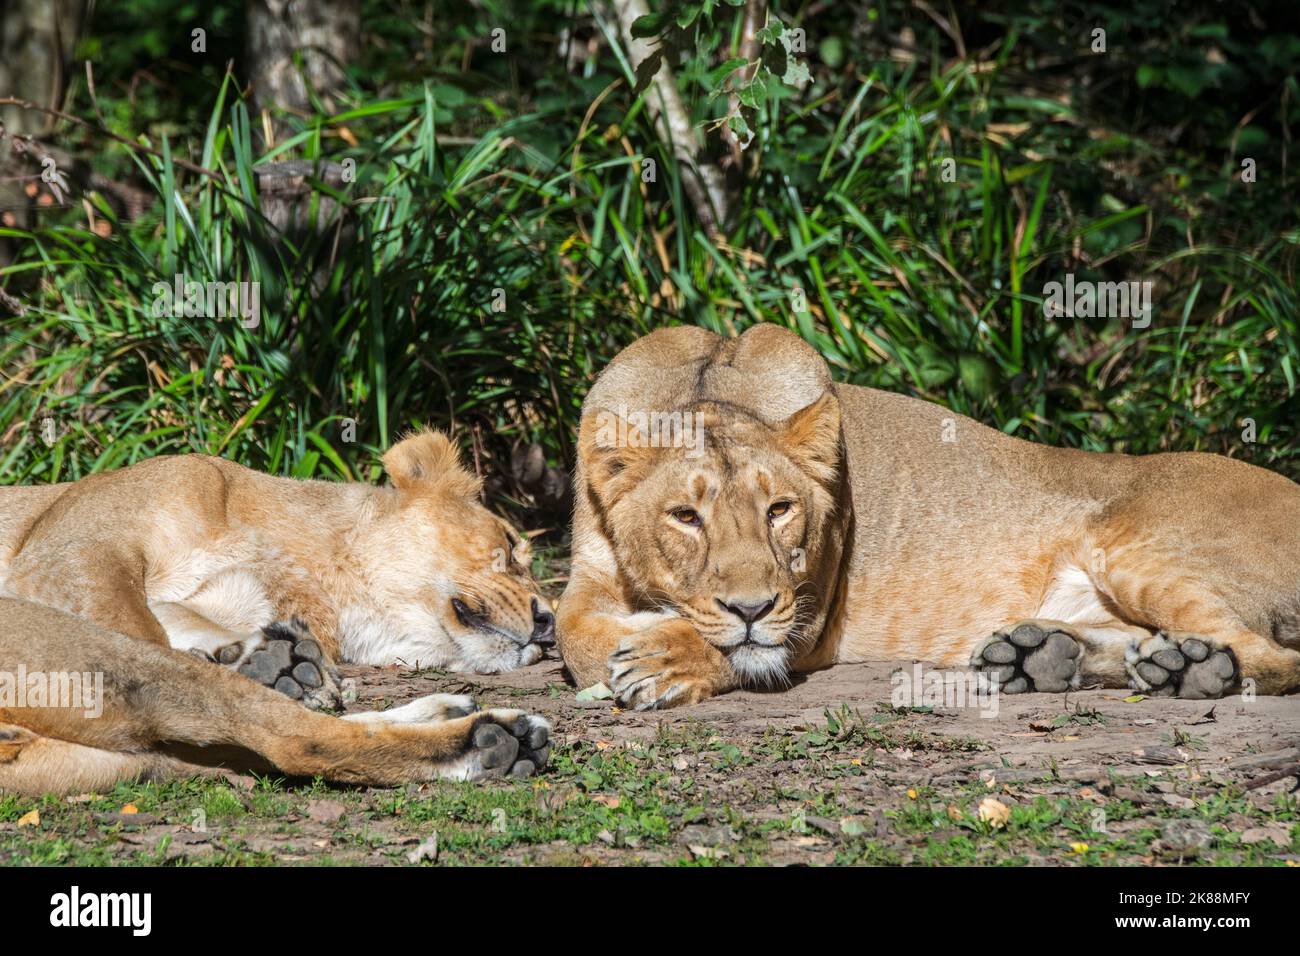 Asiatic lion / Gir lion (Panthera leo persica) two resting lionesses / females, native to India Stock Photo